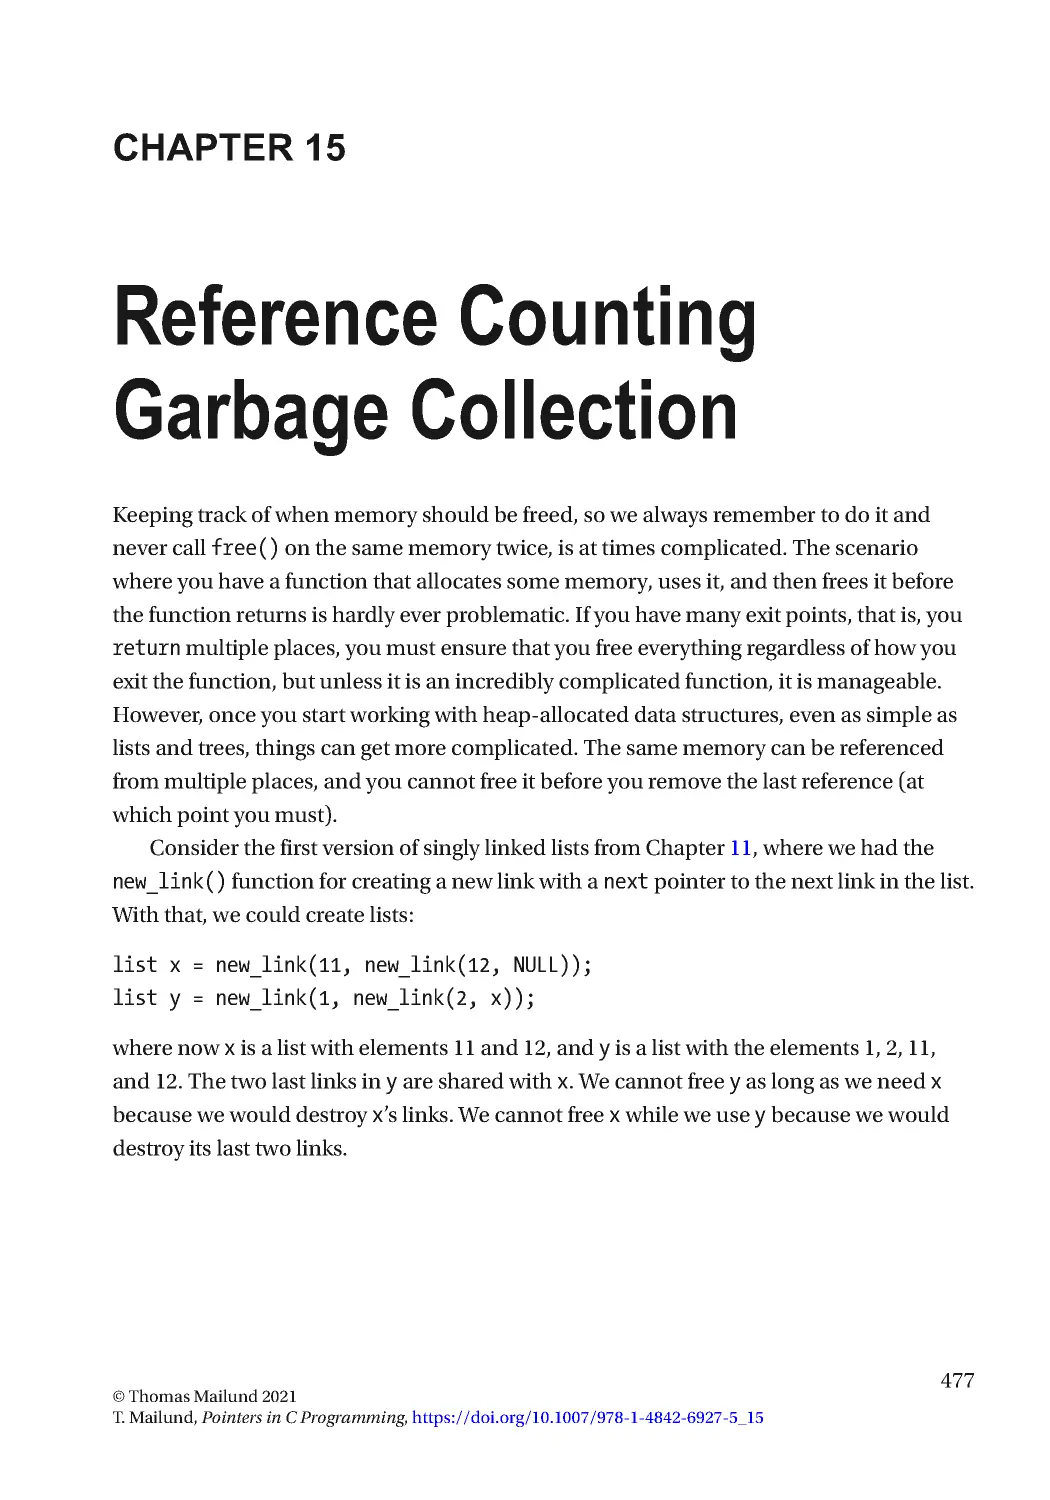 Chapter 15: Reference Counting Garbage Collection